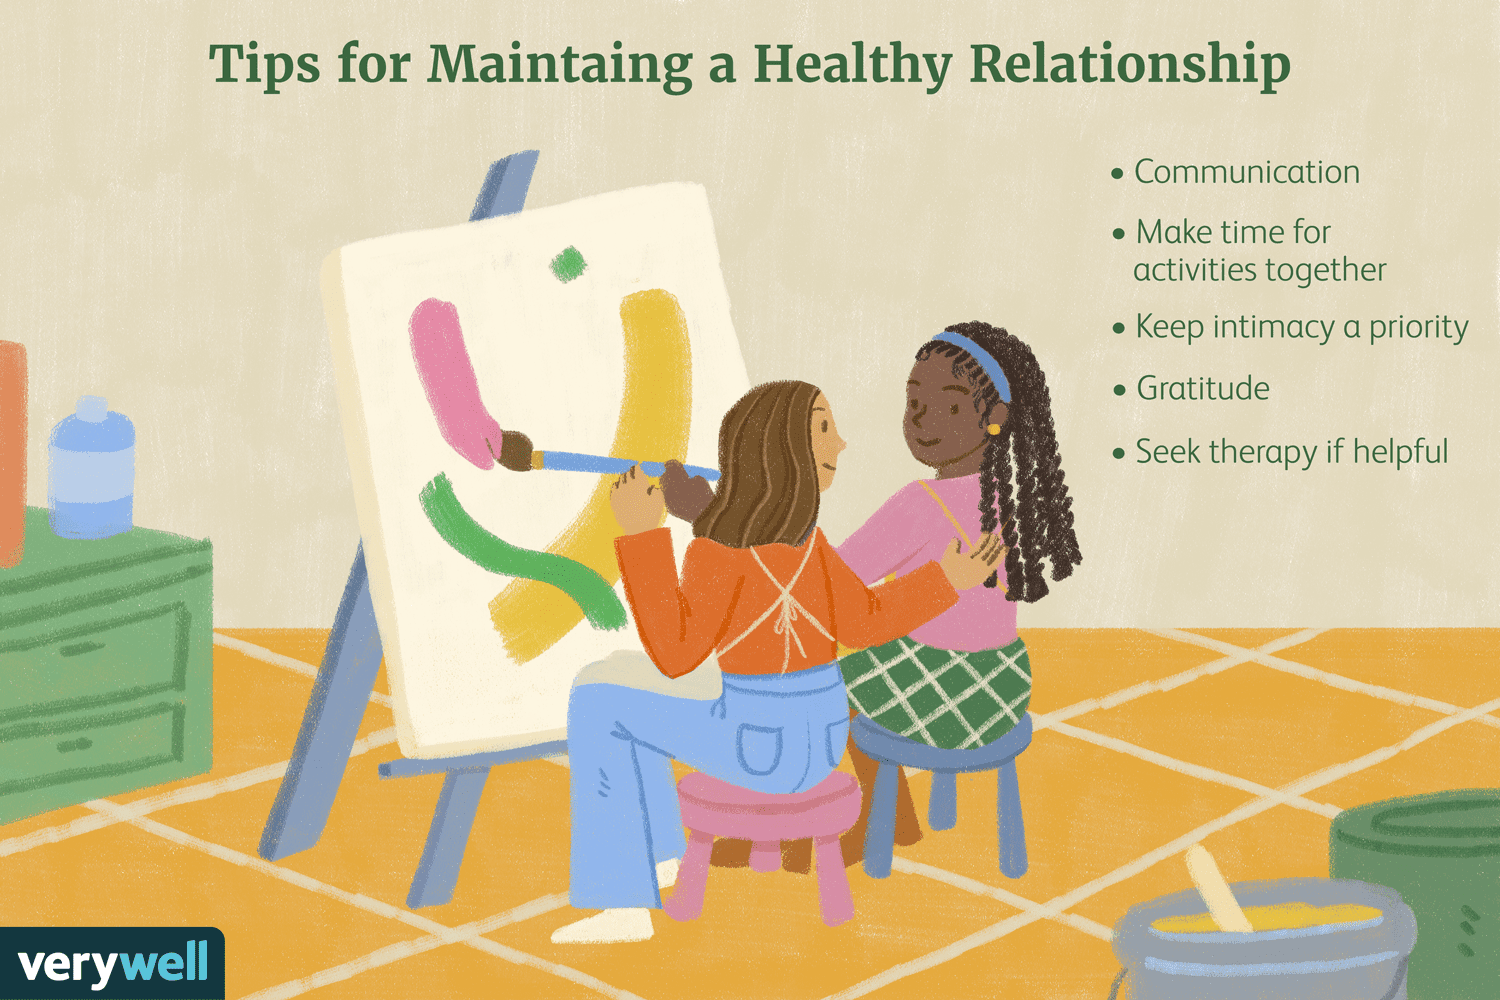 Tips for maintaining a healthy relationship